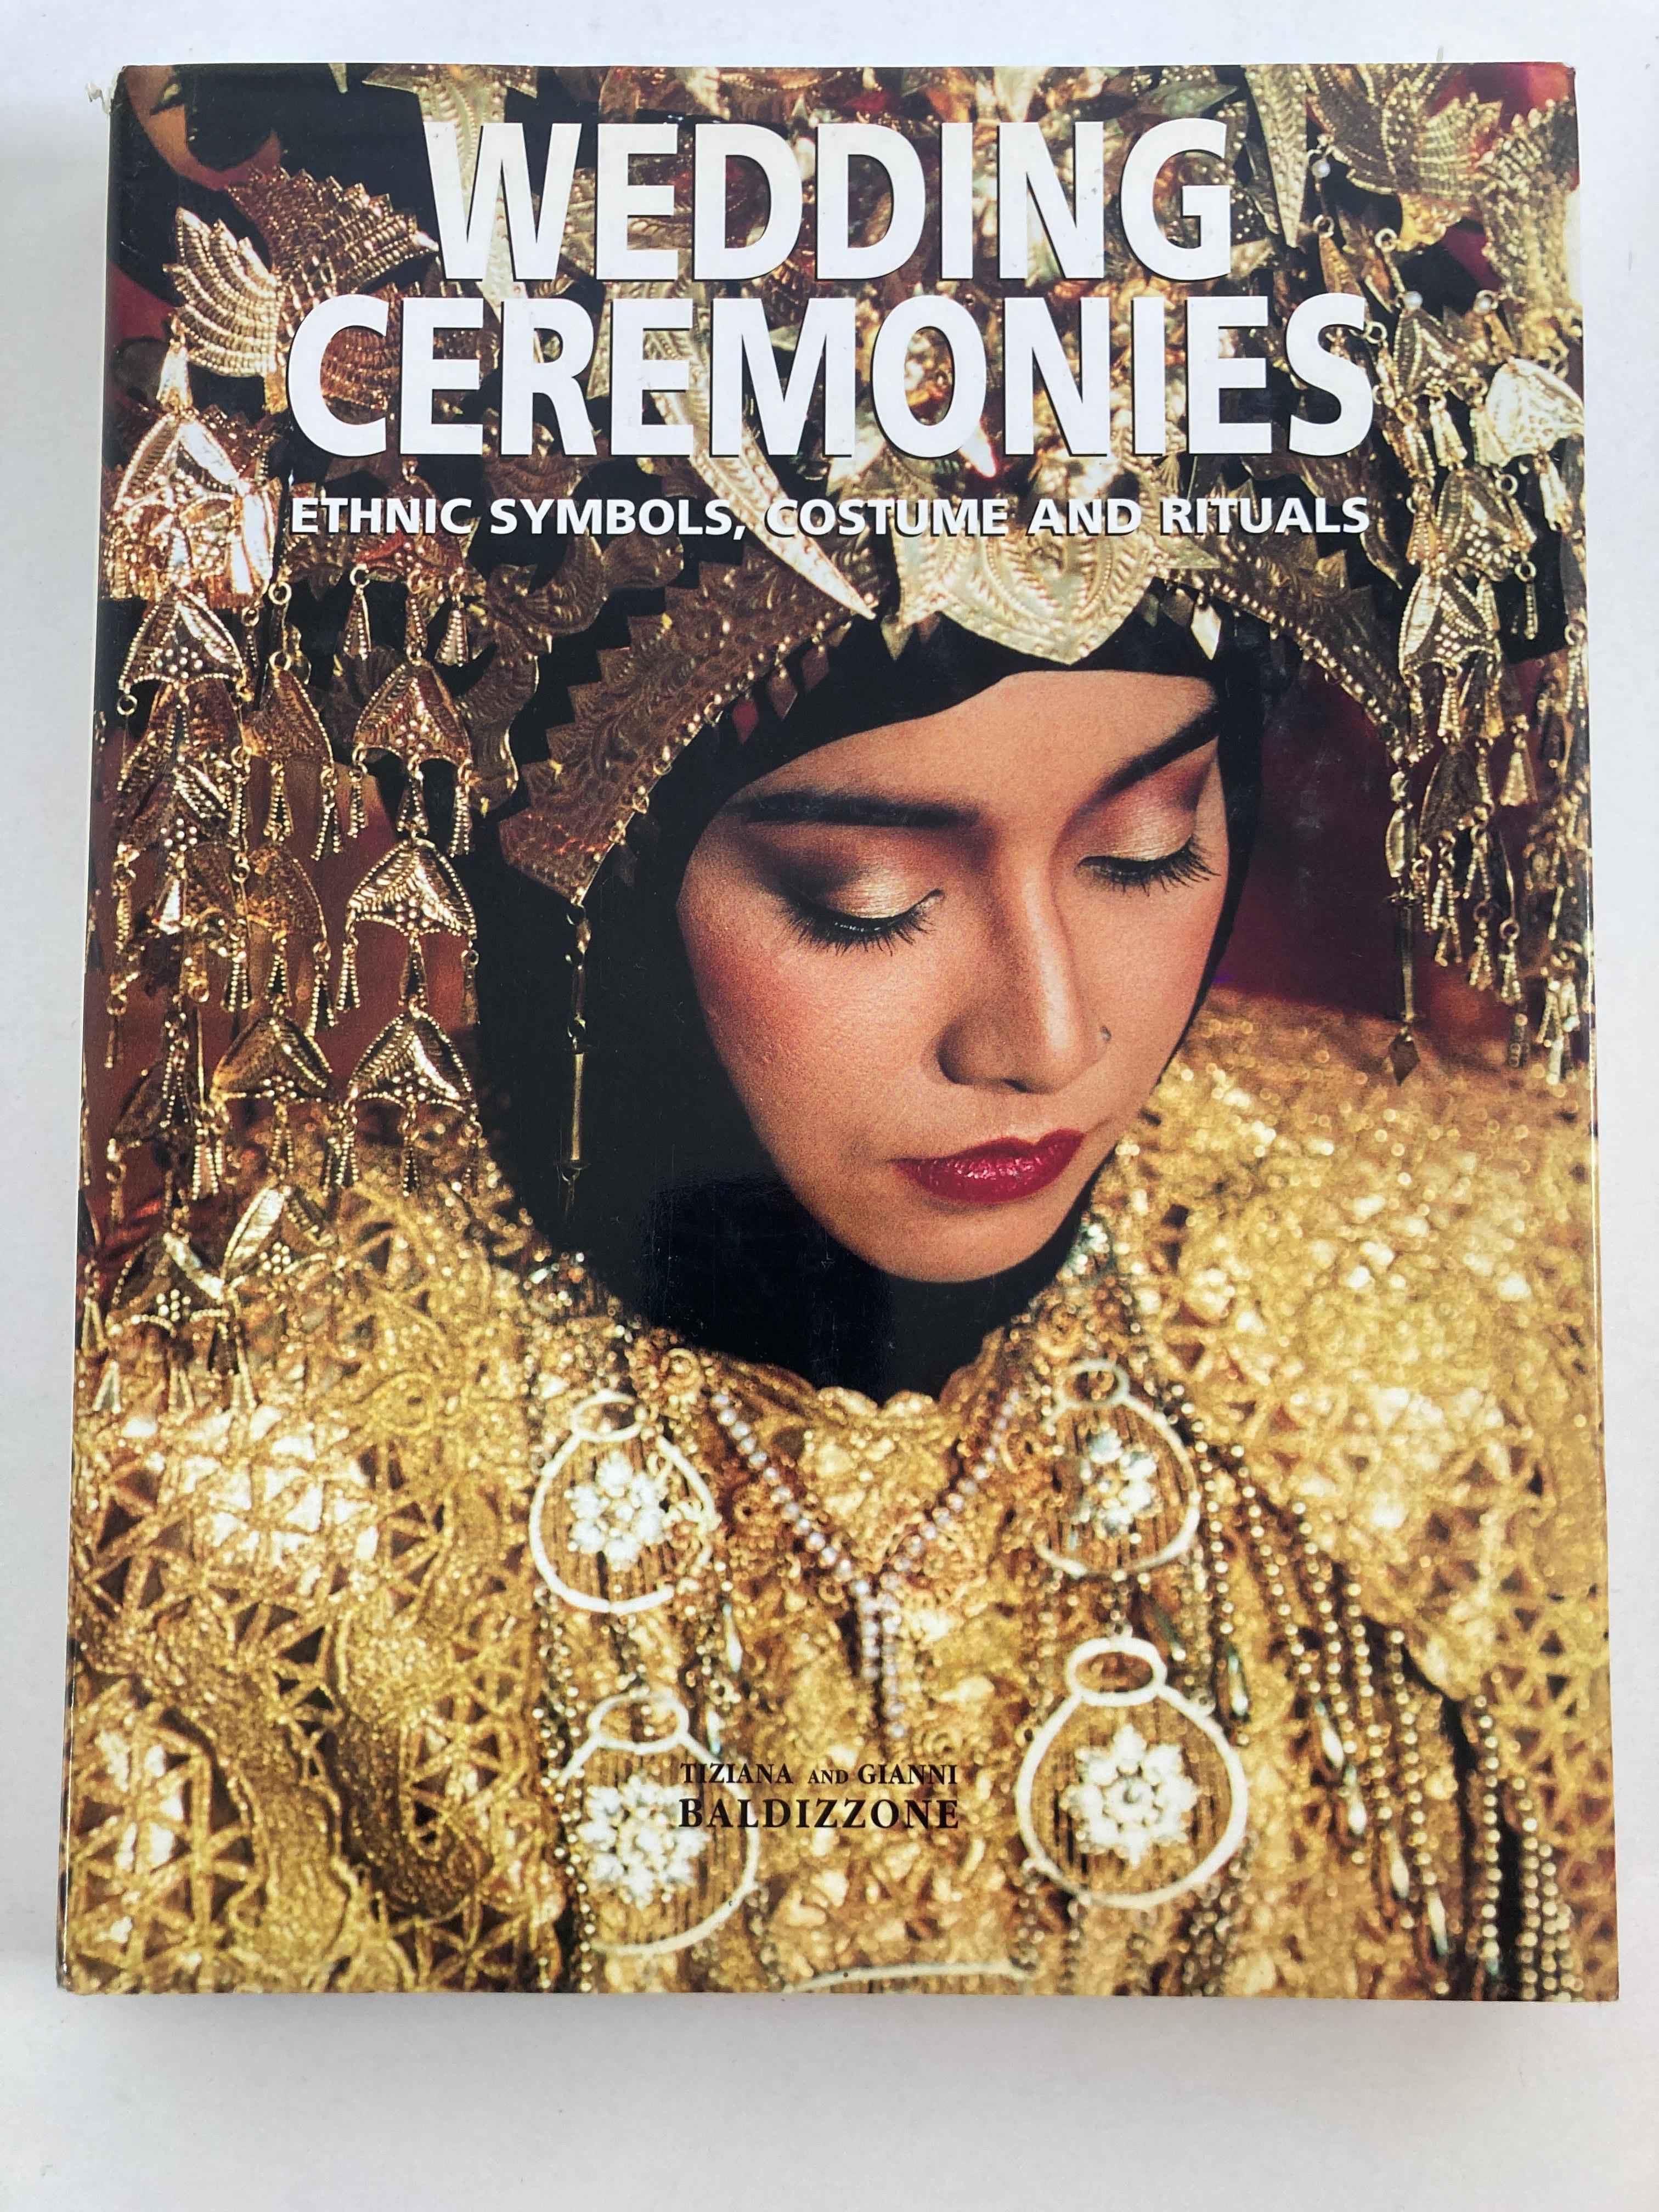 Wedding Ceremonies: Ethnic Symbols, Costume and Rituals by Gianni Baldezzoni. Wedding Ceremonies: Symbols, Costume and Rituals is a glorious visual celebration of the symbolism of marriage the world over. The authors have traveled the world for two